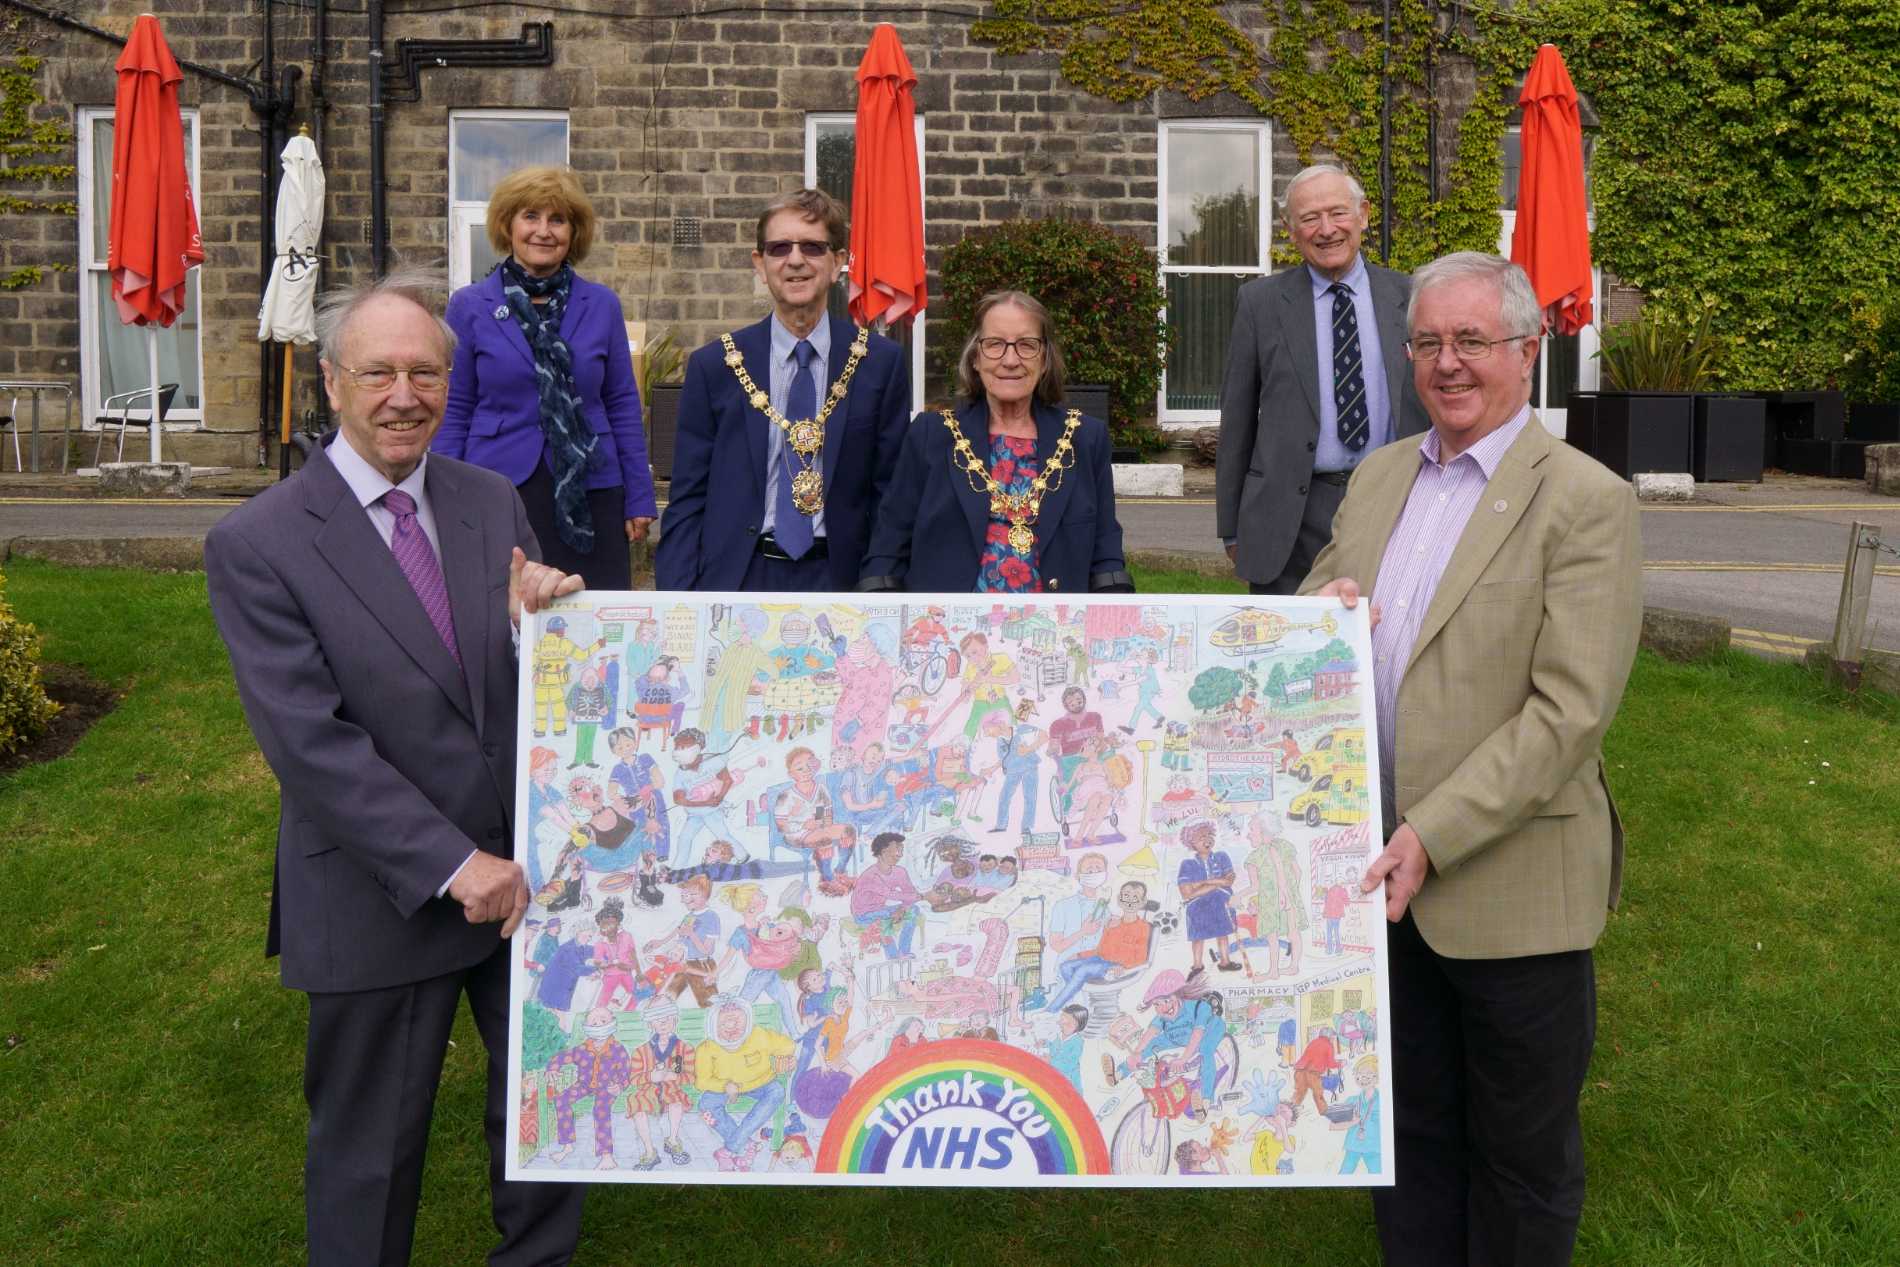 Dr Albert Day, Friends of Harrogate Hospital, Angela Schofield, Chair of HDFT, Mayor of Harrogate District, Trevor Chapman and his wife, Janet. Andy Wilkinson (Chair of Friends), John Fox, Friends of Harrogate Hospital